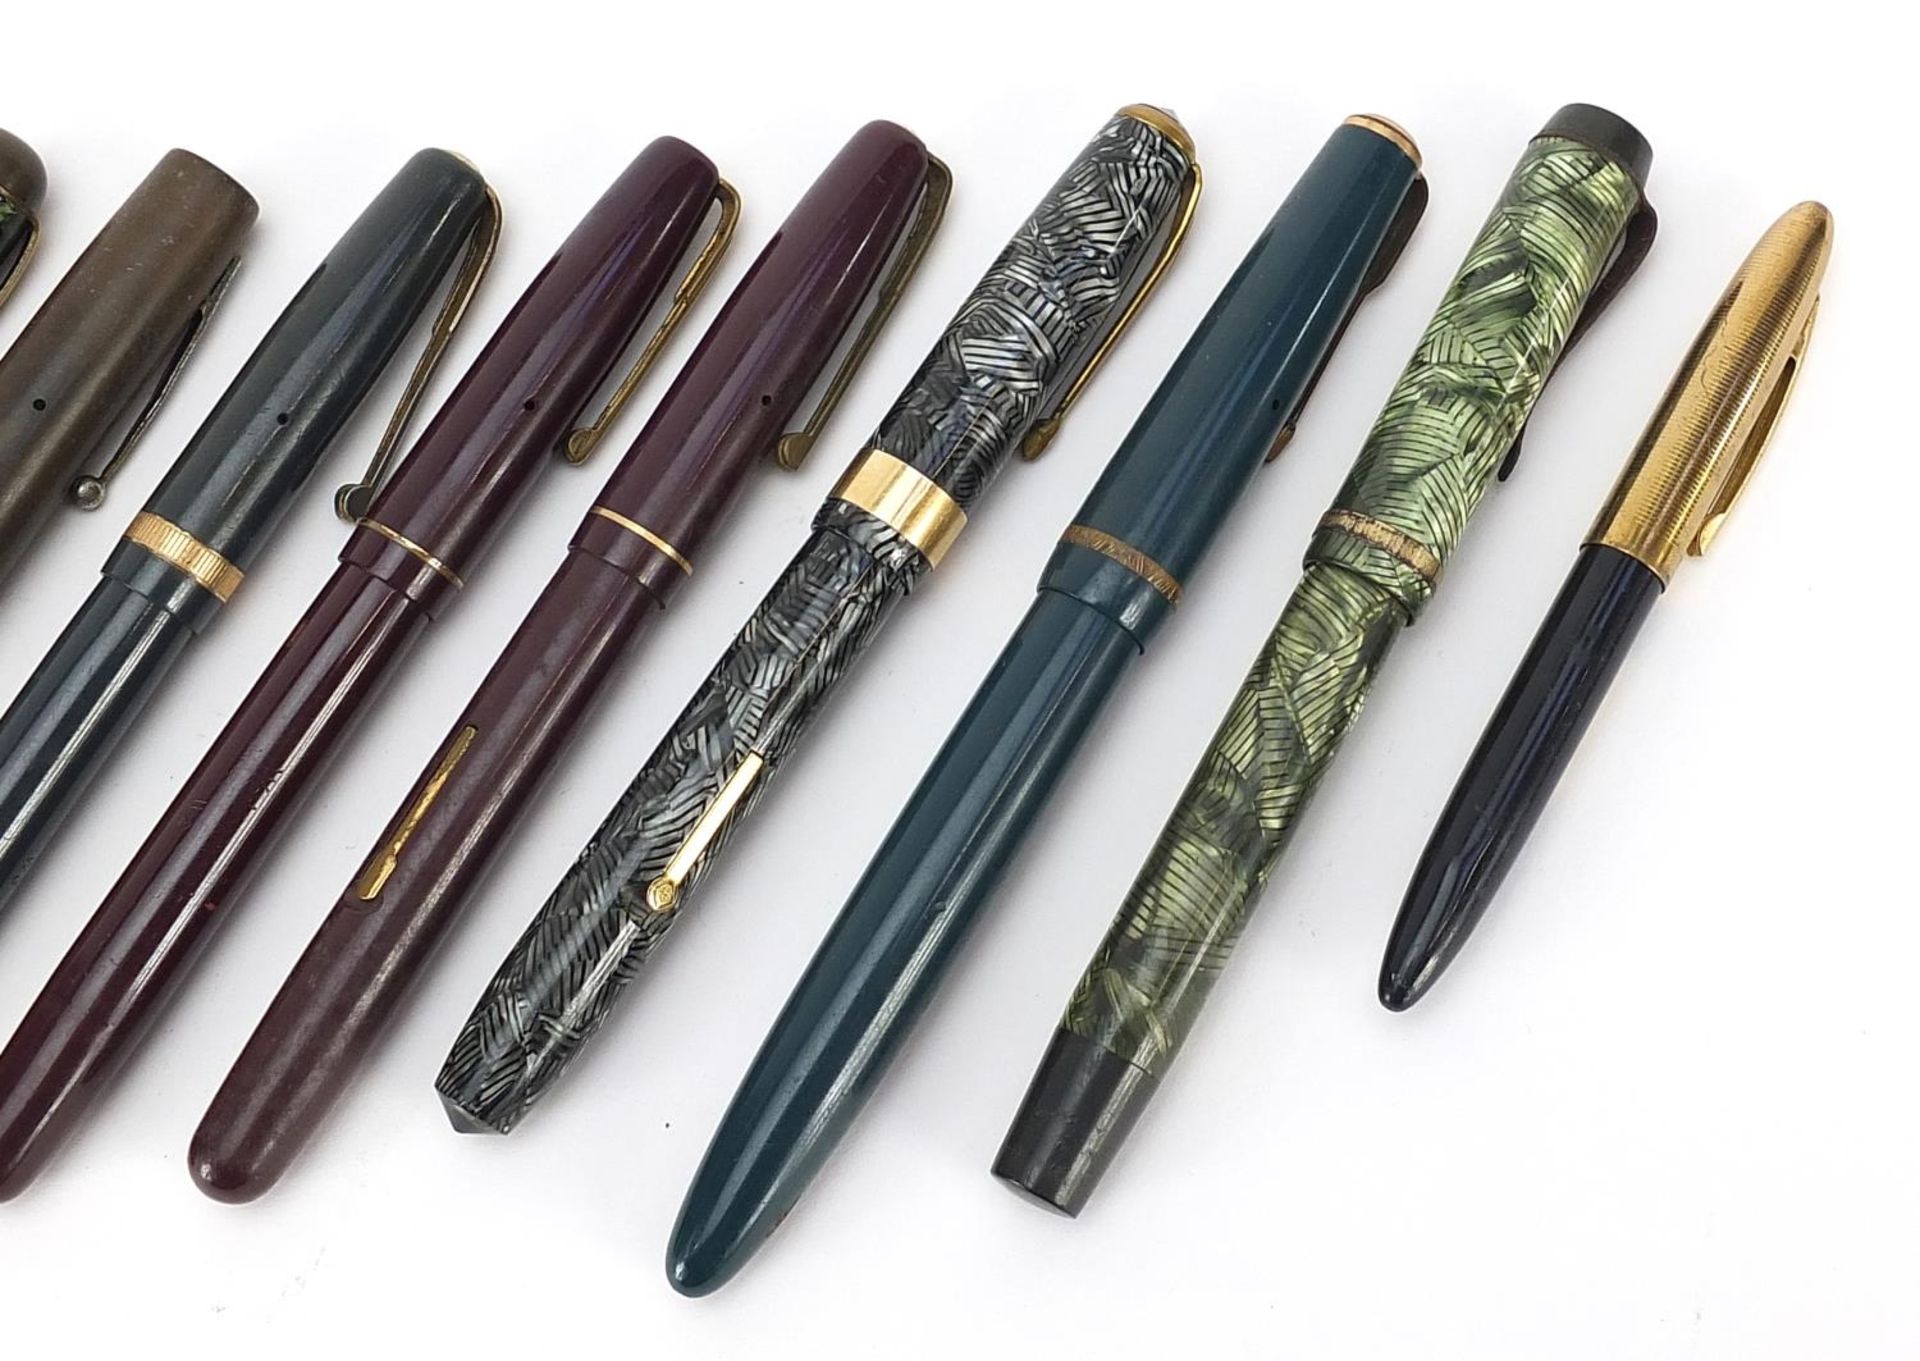 Ten vintage fountain pens with gold nibs, some marbleised including Watermans, Parker and Conway - Image 3 of 8